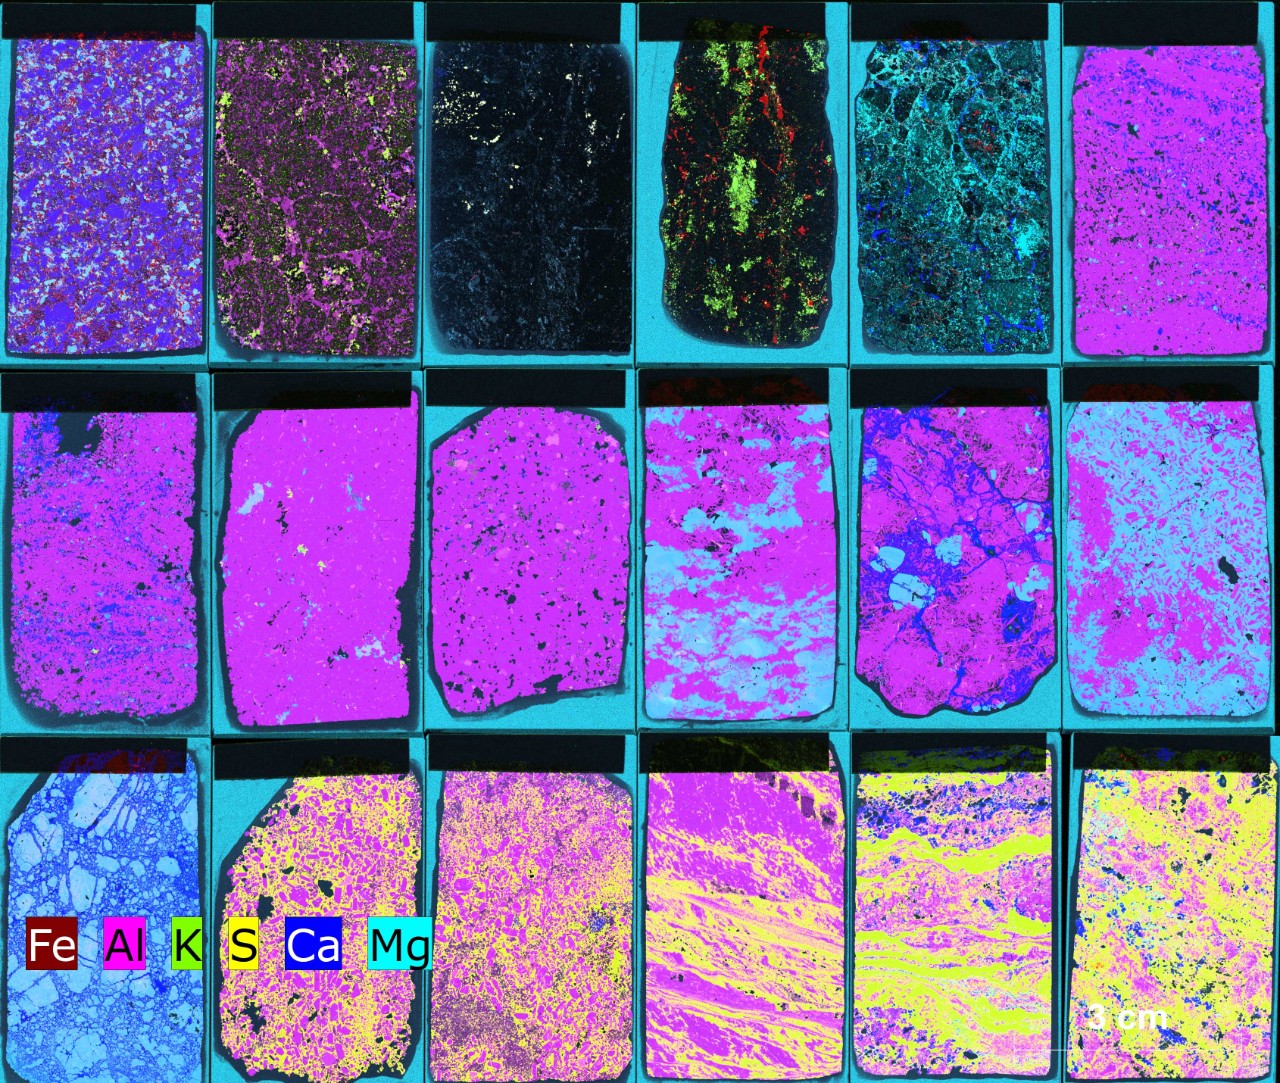 multi-element image of 18 thin sections